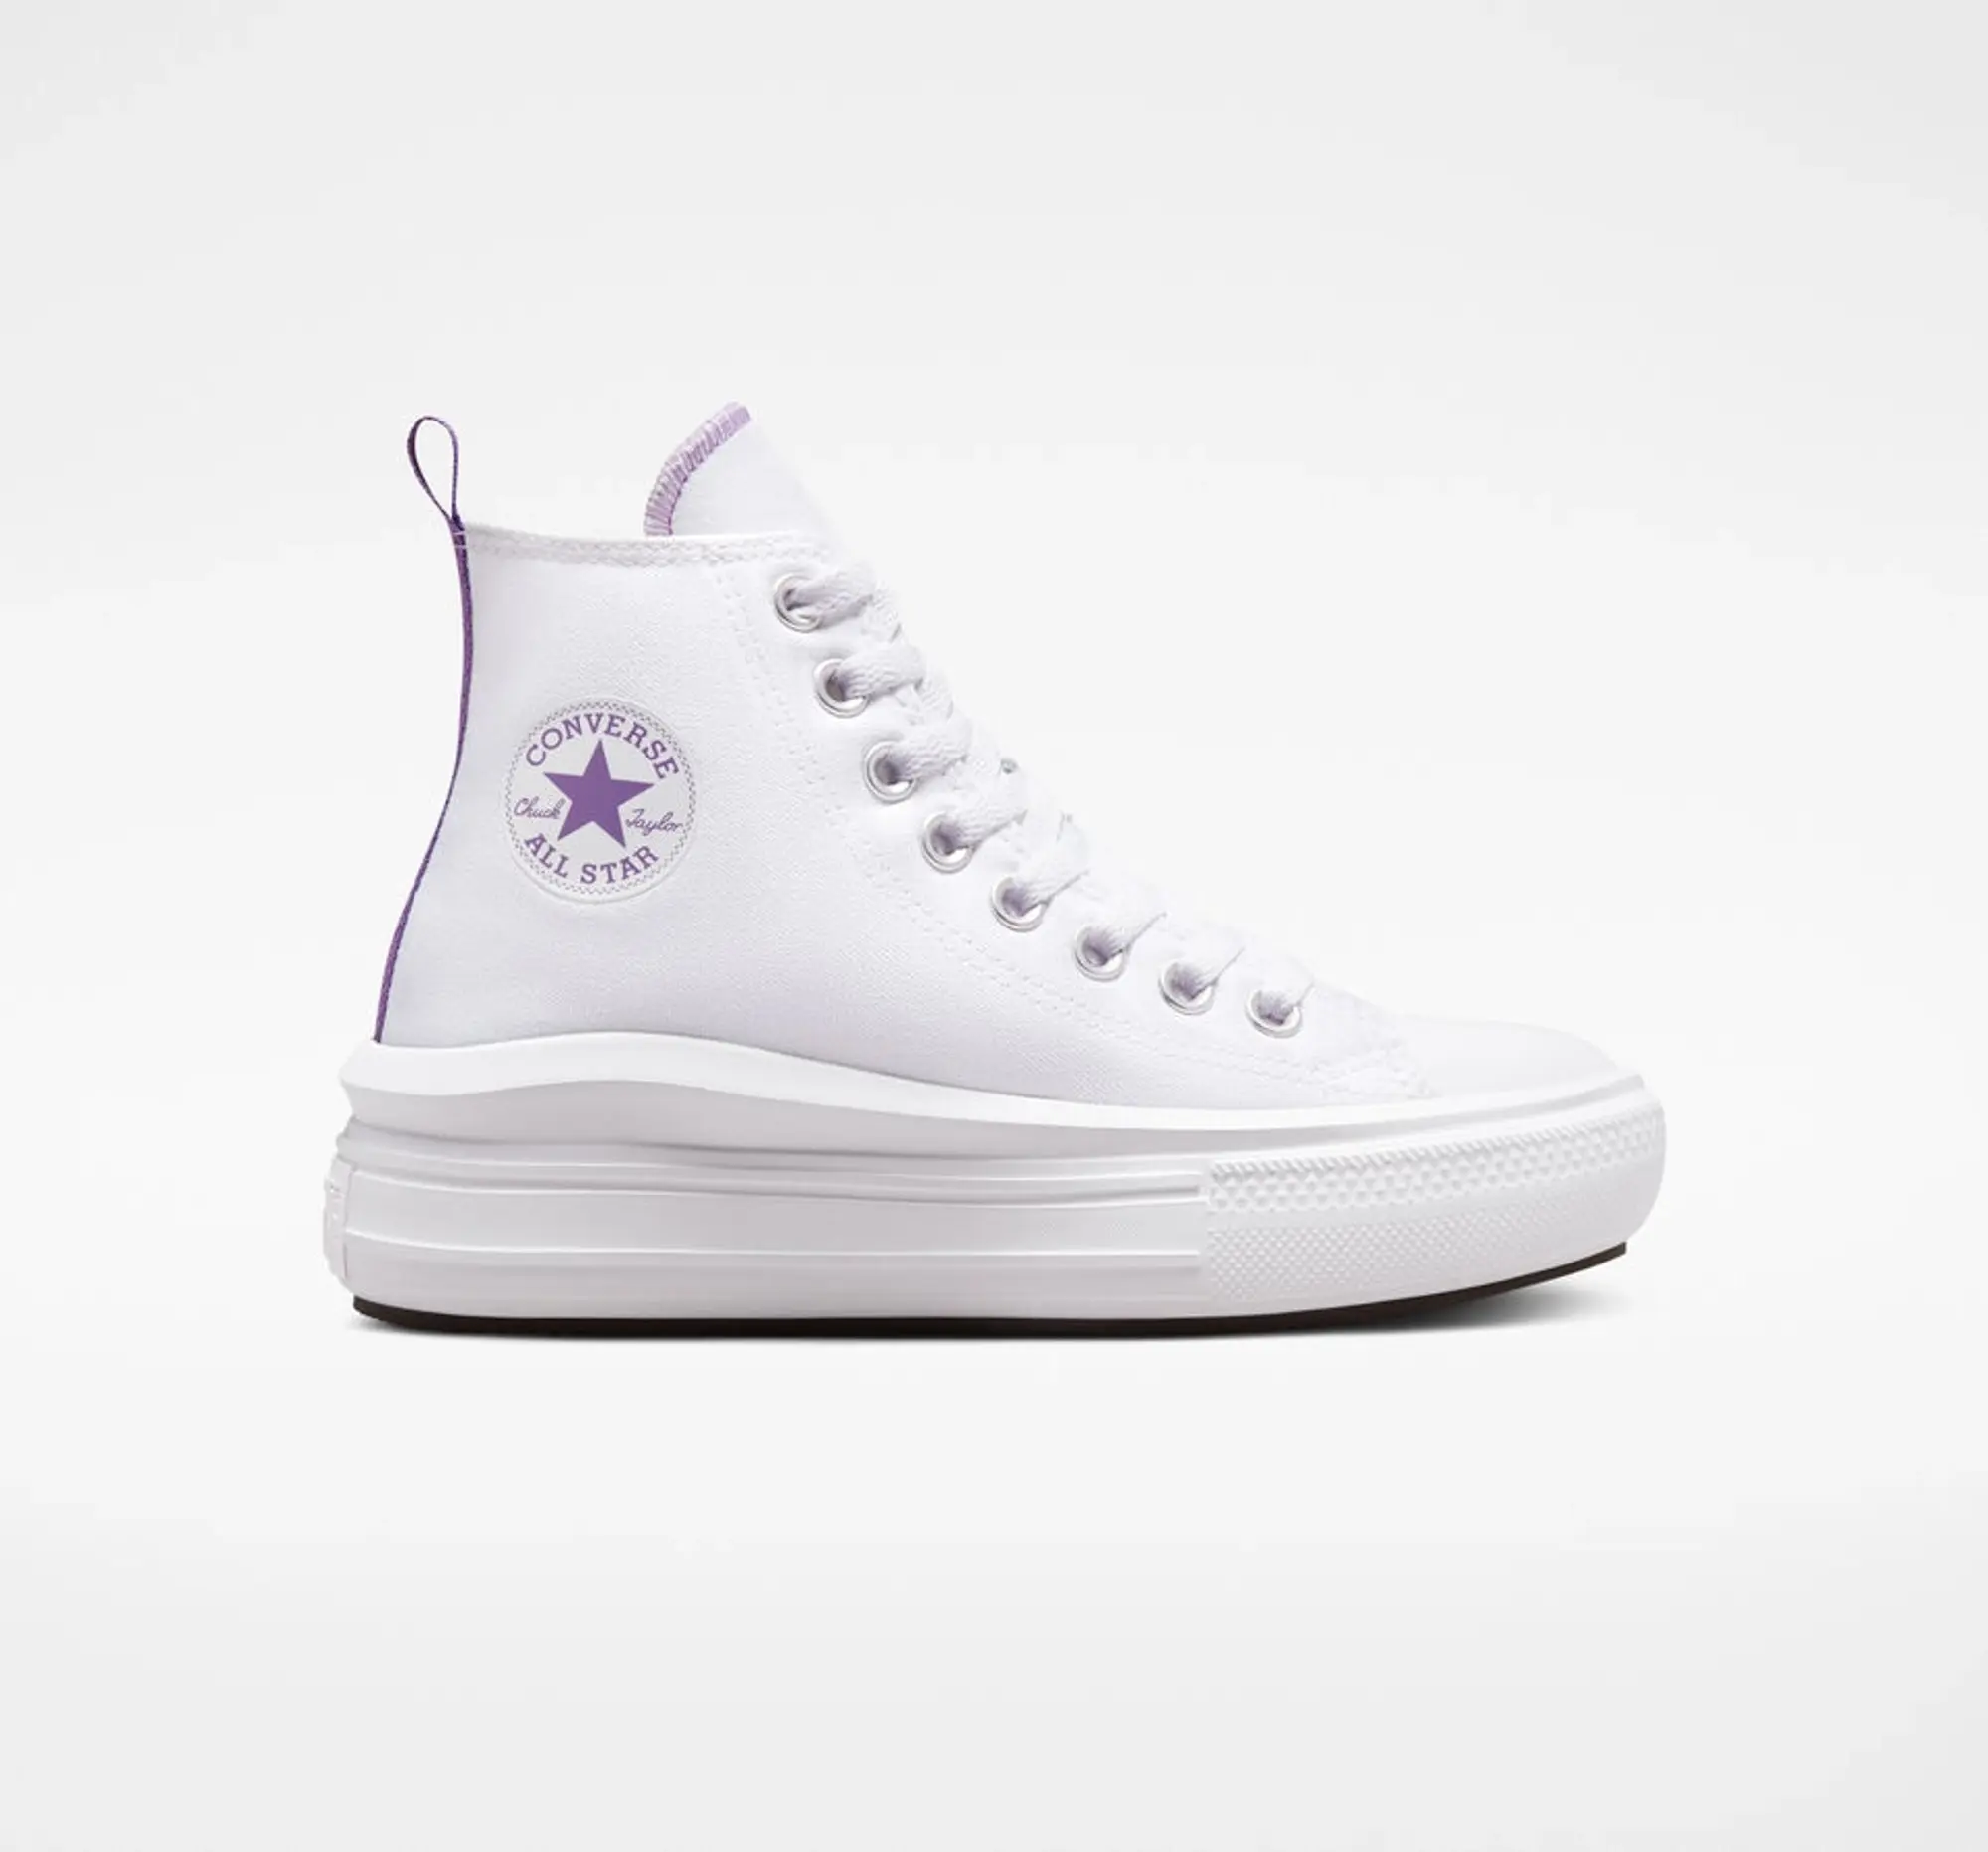 Converse White All Star Move Platform Girls Youth Trainers